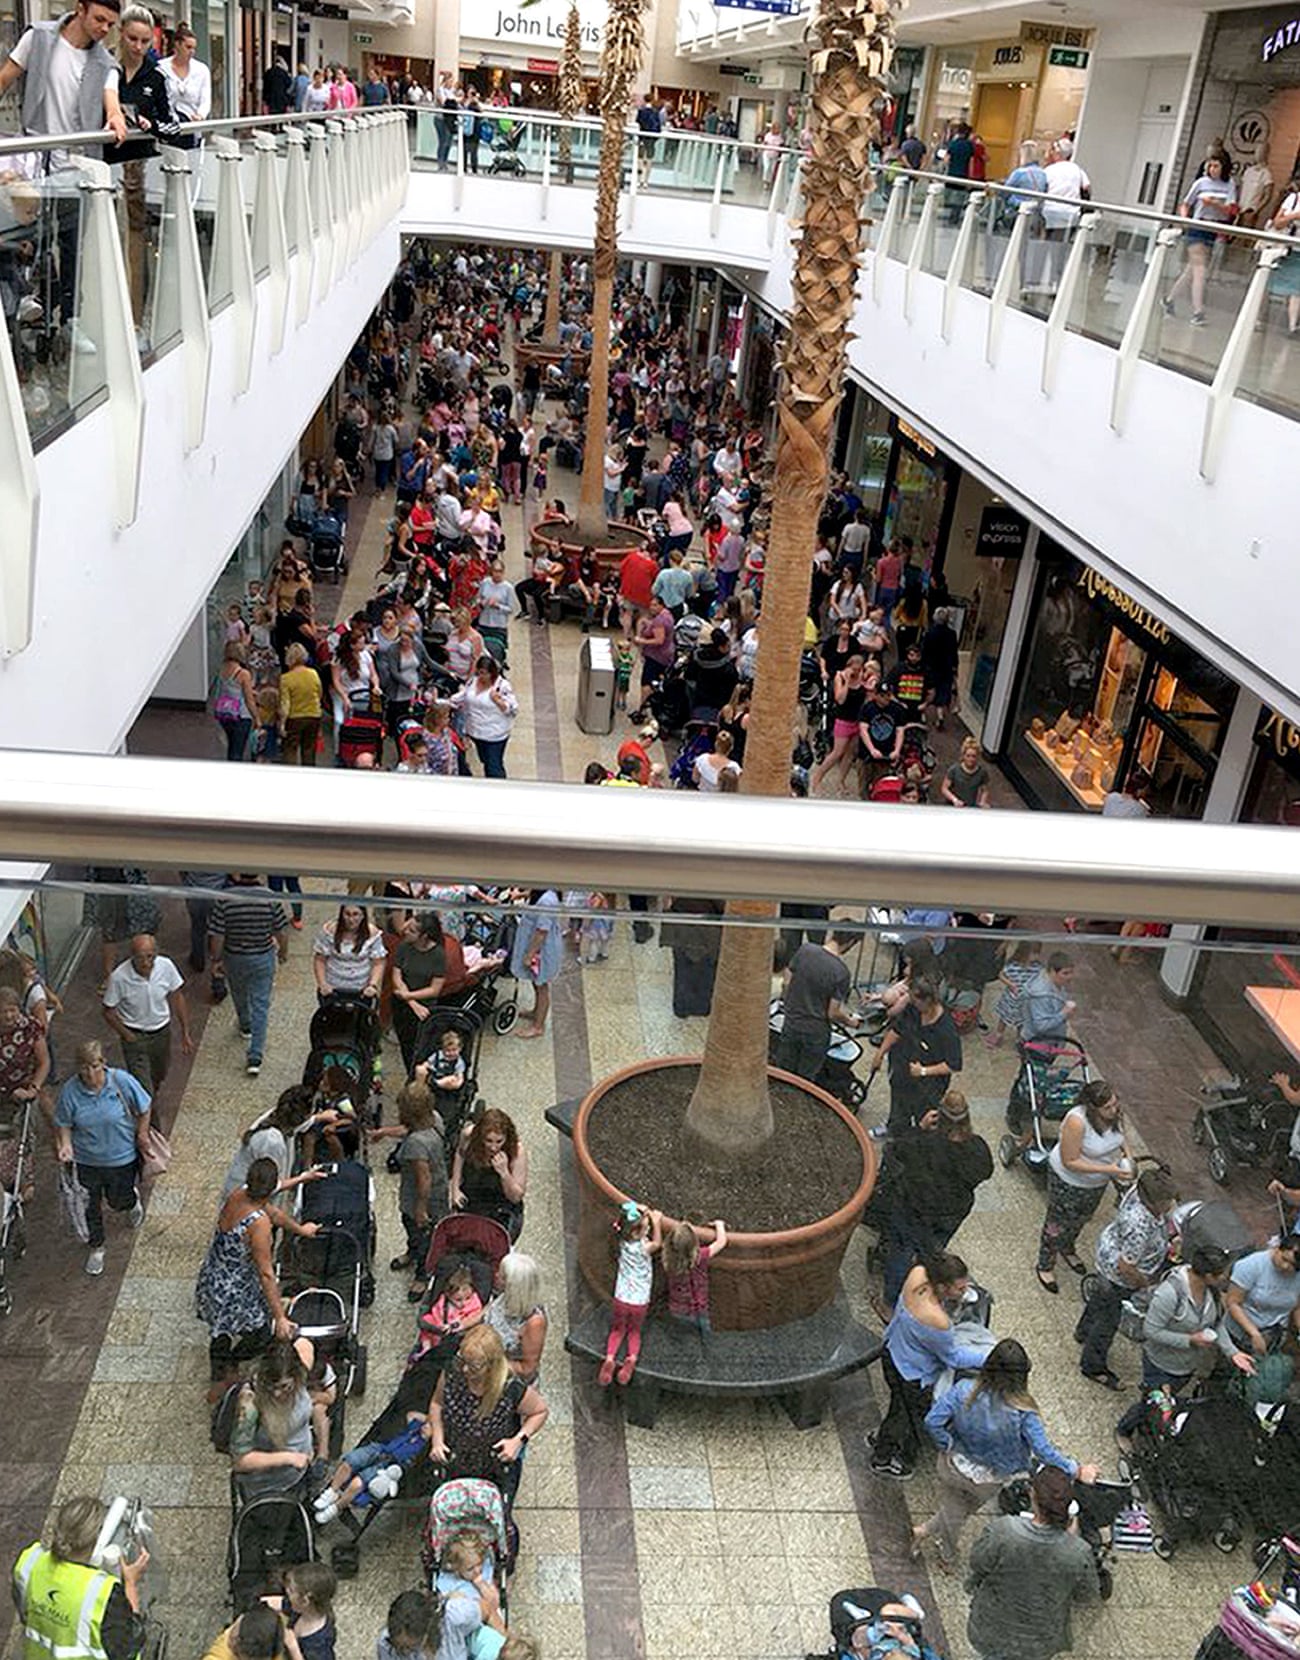 The queue for Build-A-Bear at the Mall Cribbs Causeway shopping centre in Bristol on 12 July.